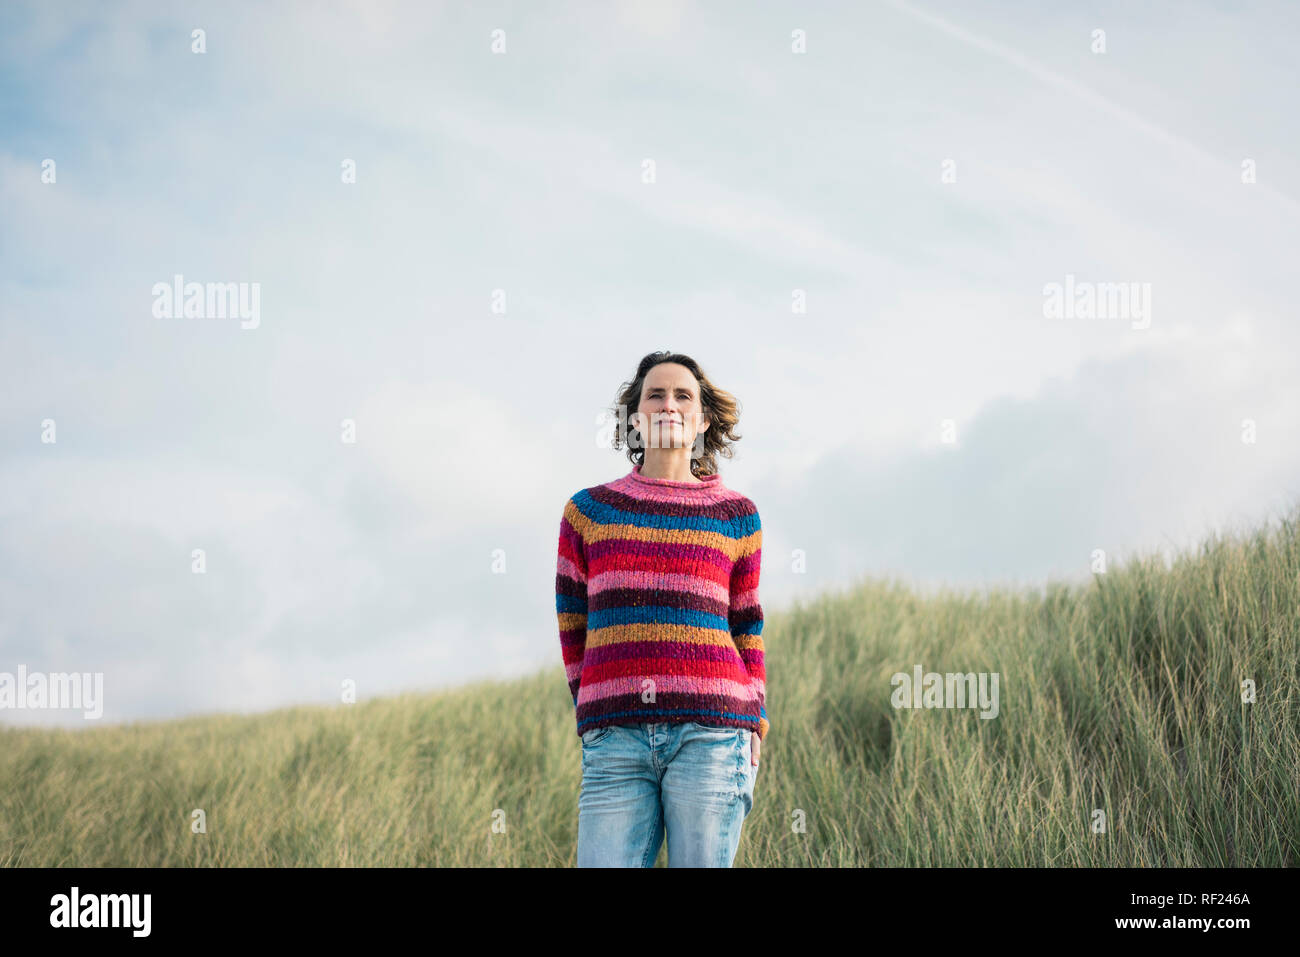 Content woman standing in the dunes, smiling Stock Photo